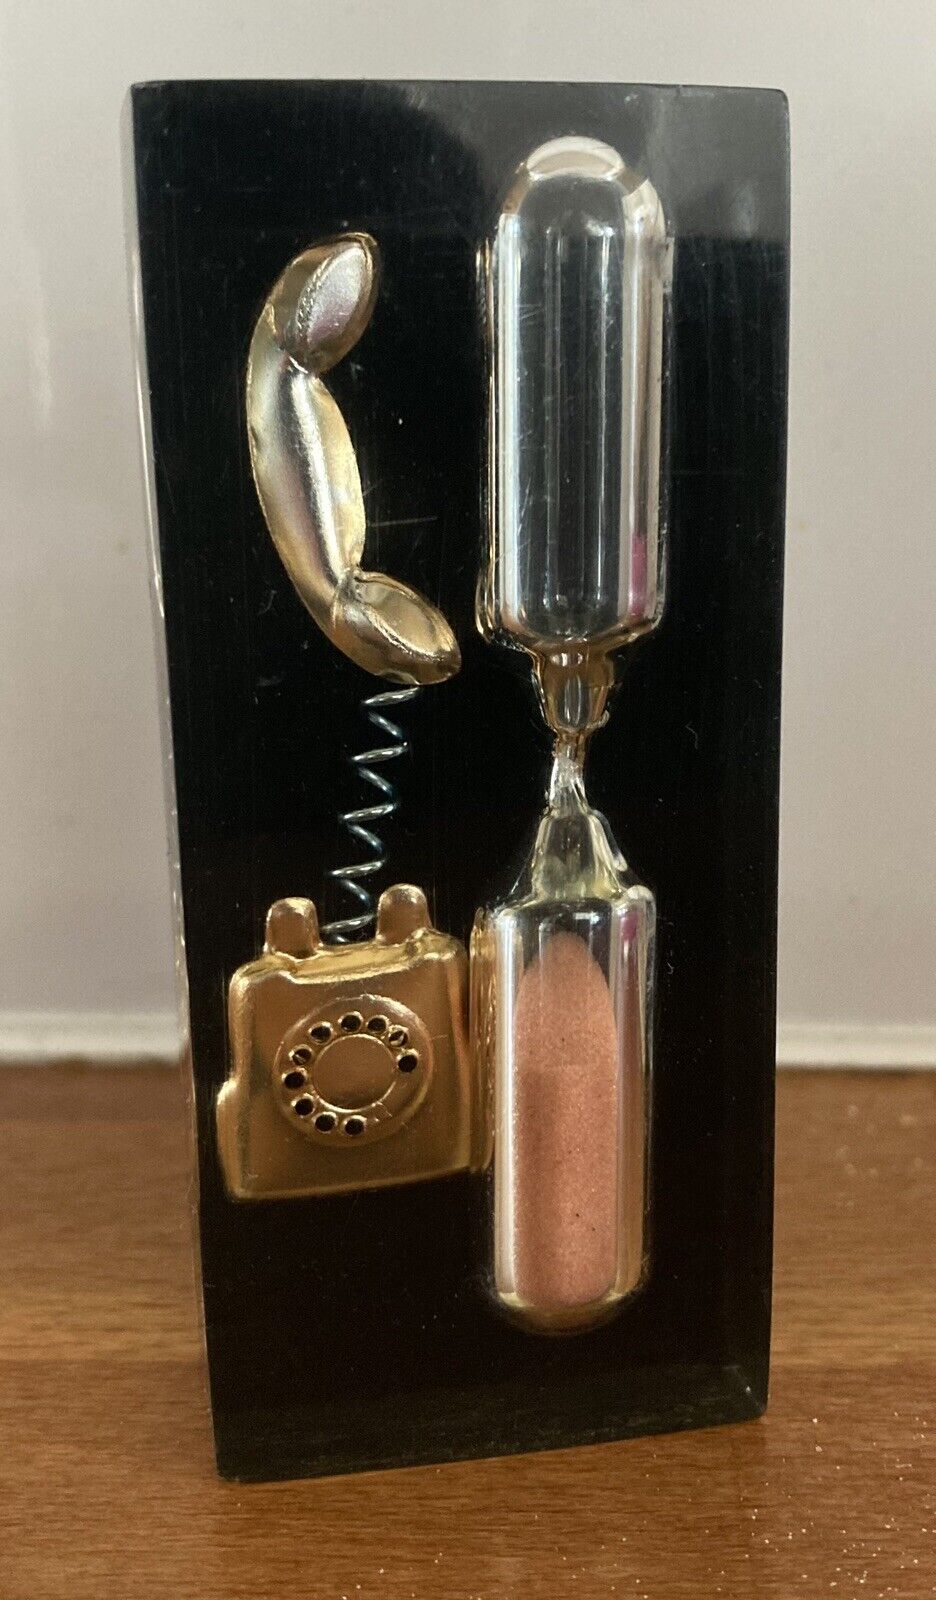 Vintage 1960’s Lucite Resin Telephone Hourglass Timer